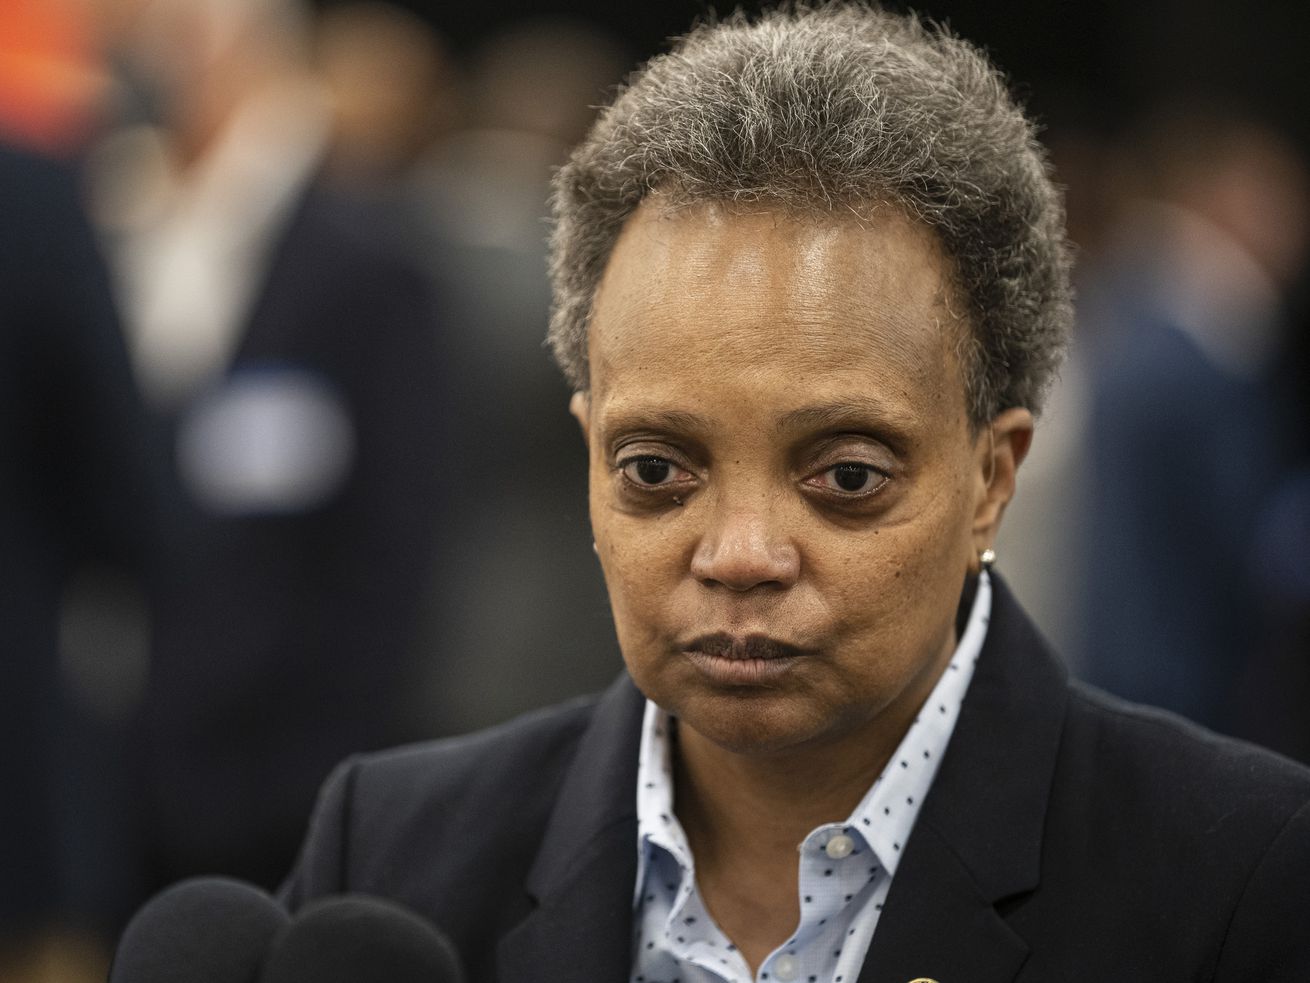 Mayor Lori Lightfoot on March 4, 2021 at the official announcement that a vacant Target store in the Gresham neighborhood will be converted into a call center for Discover Financial Services.